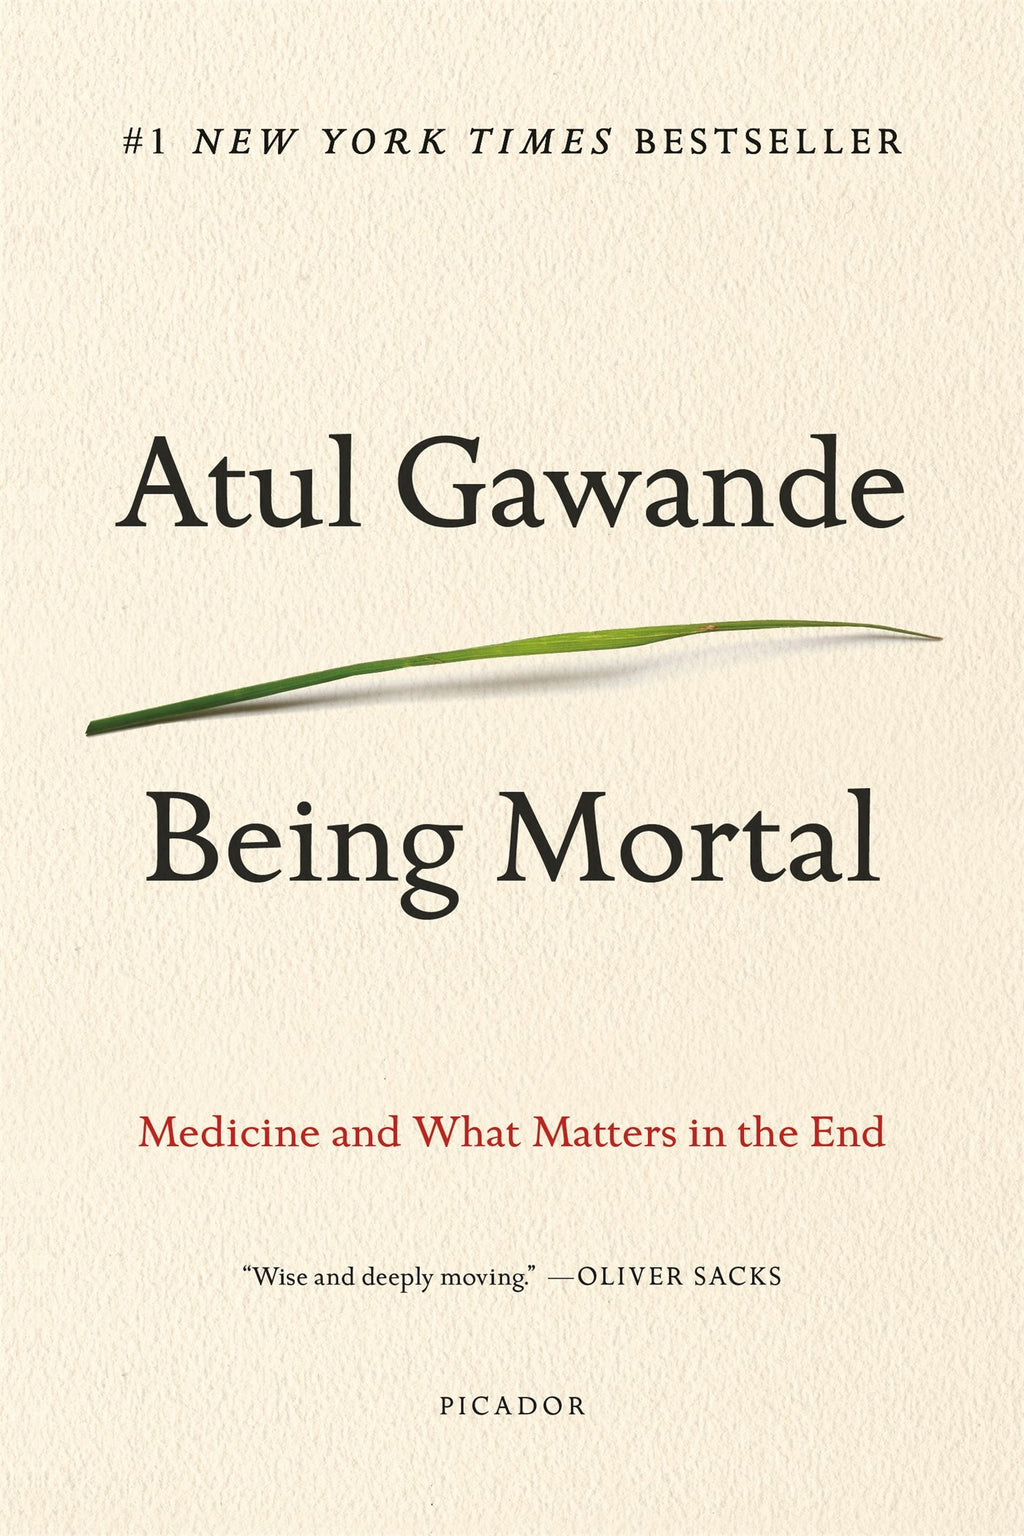 Being Mortal: Medicine and What Matters in the End Paperback by Atul Gawande - Best Bookstore